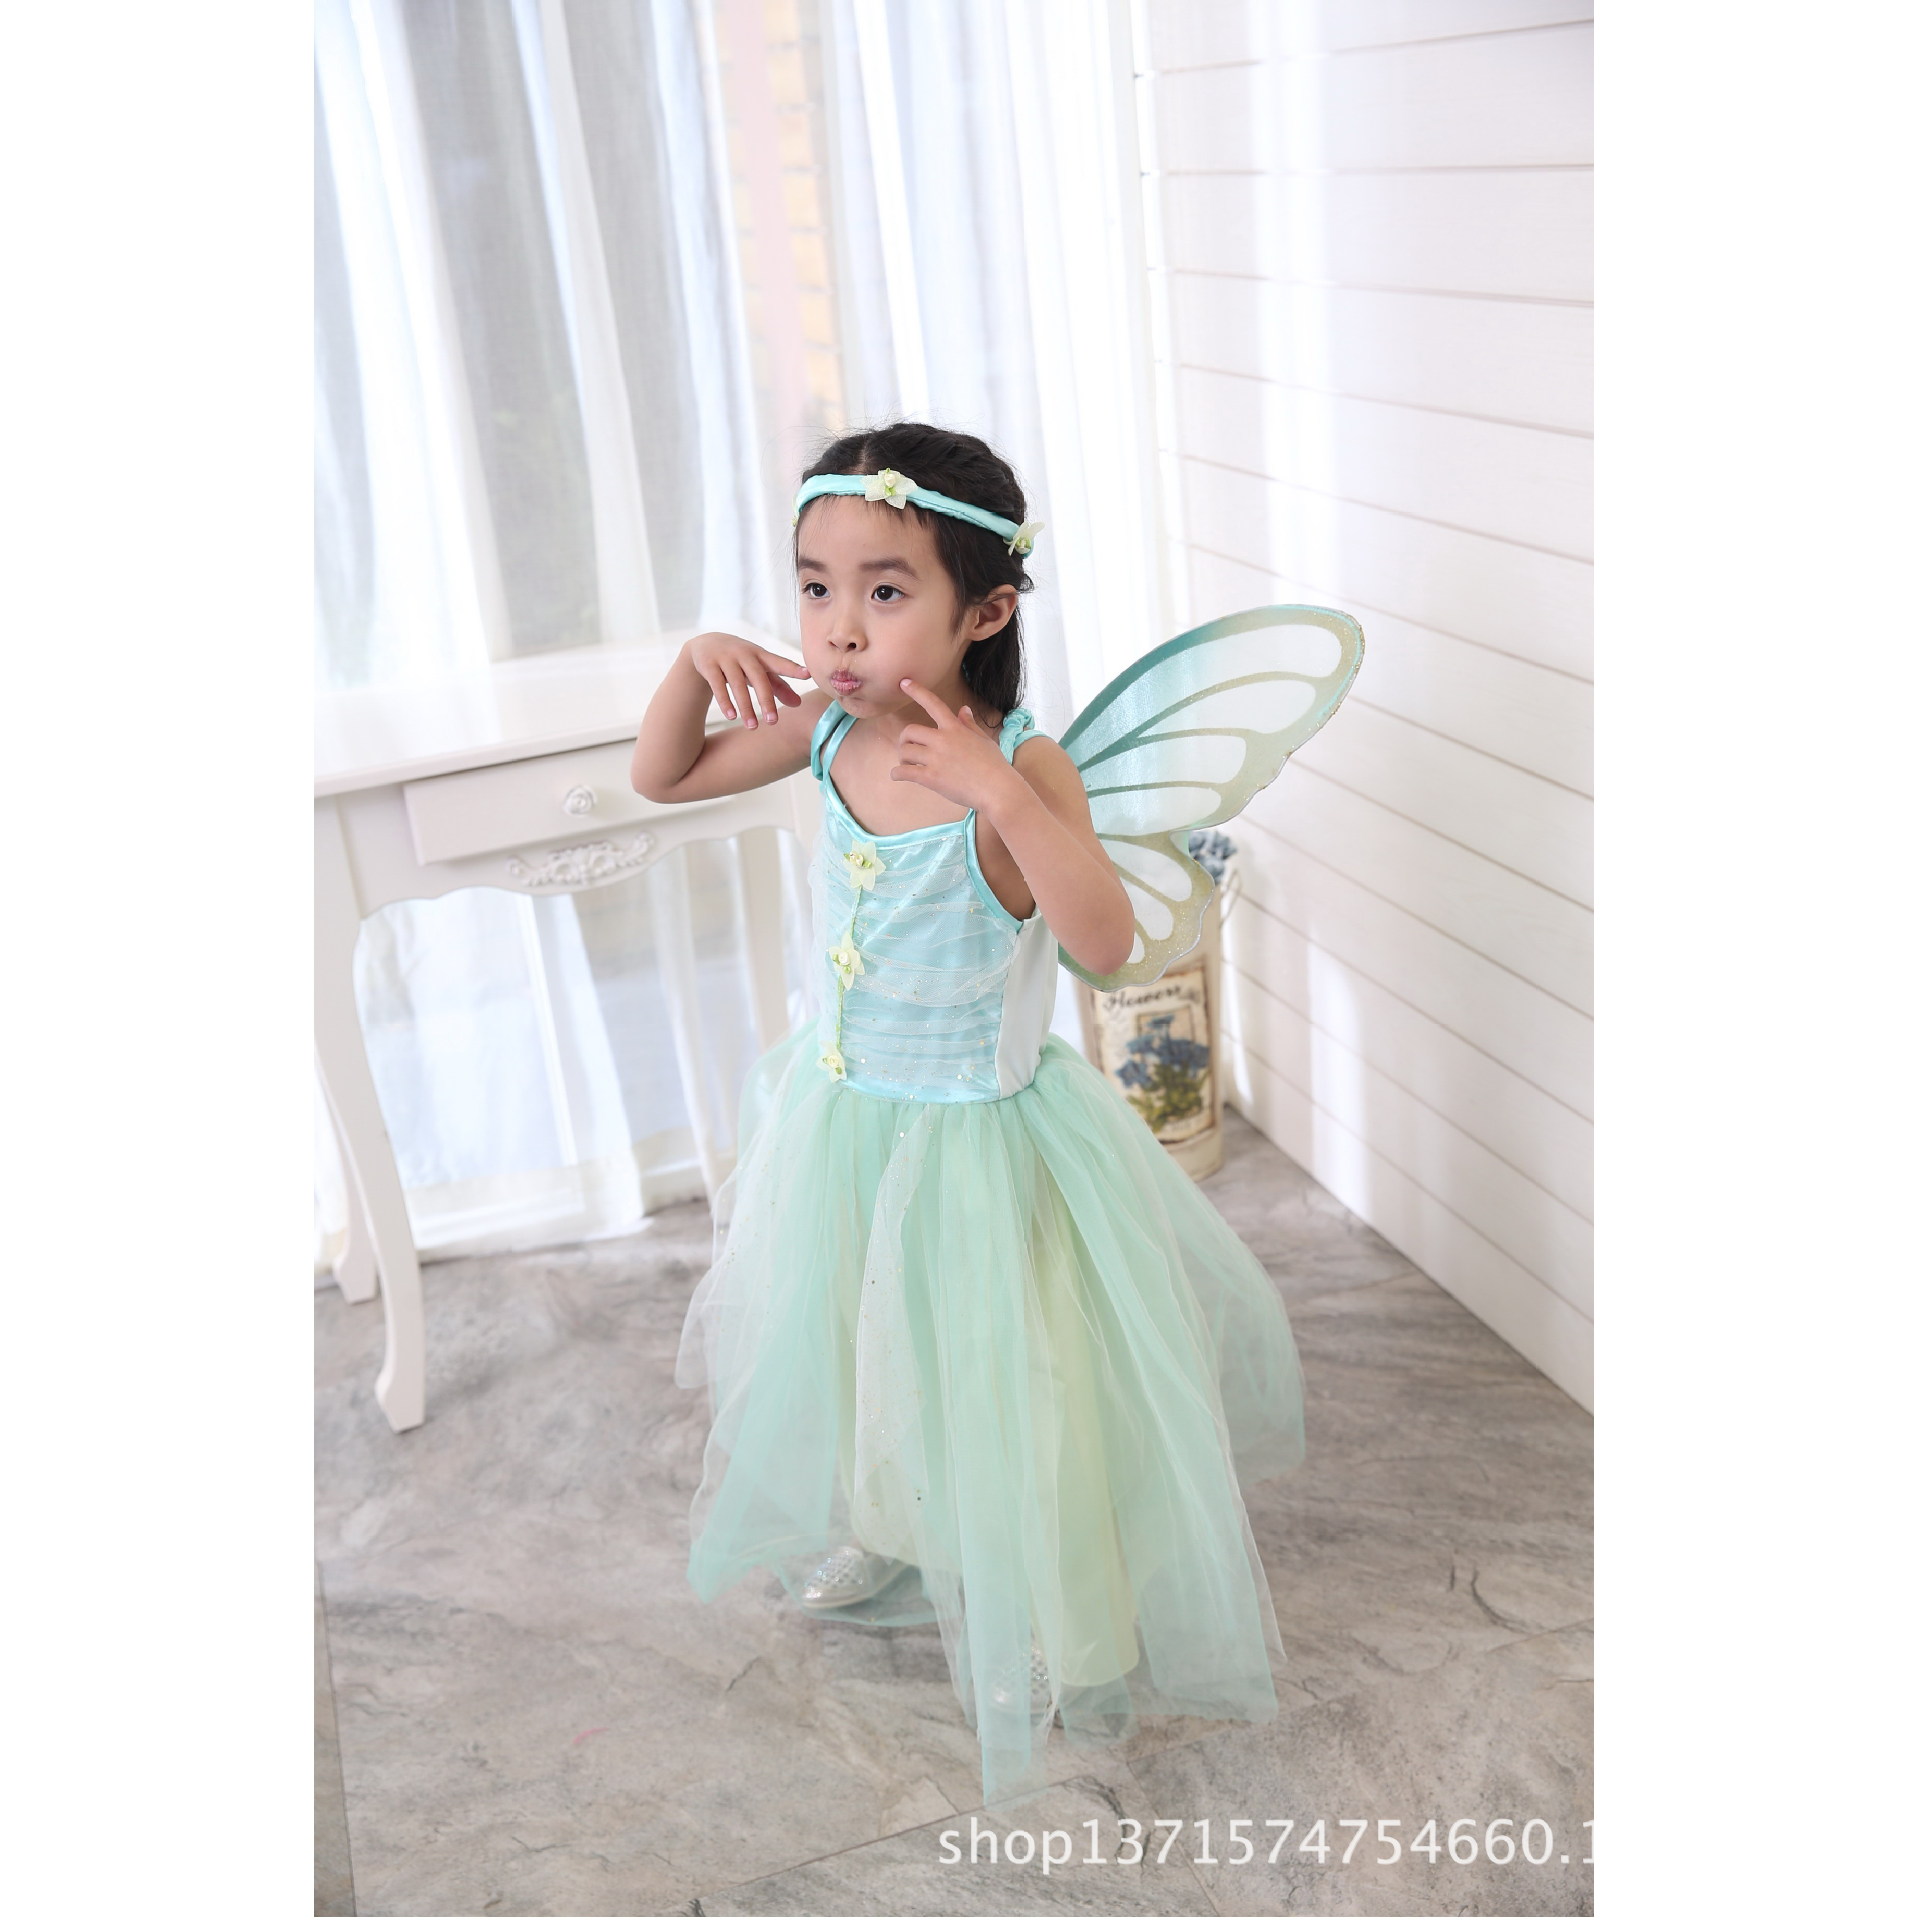 2020 New Kids Carnival Clothing Girls Green Fairy Cosplay Princess Dress Children Halloween Party Role Play Costume